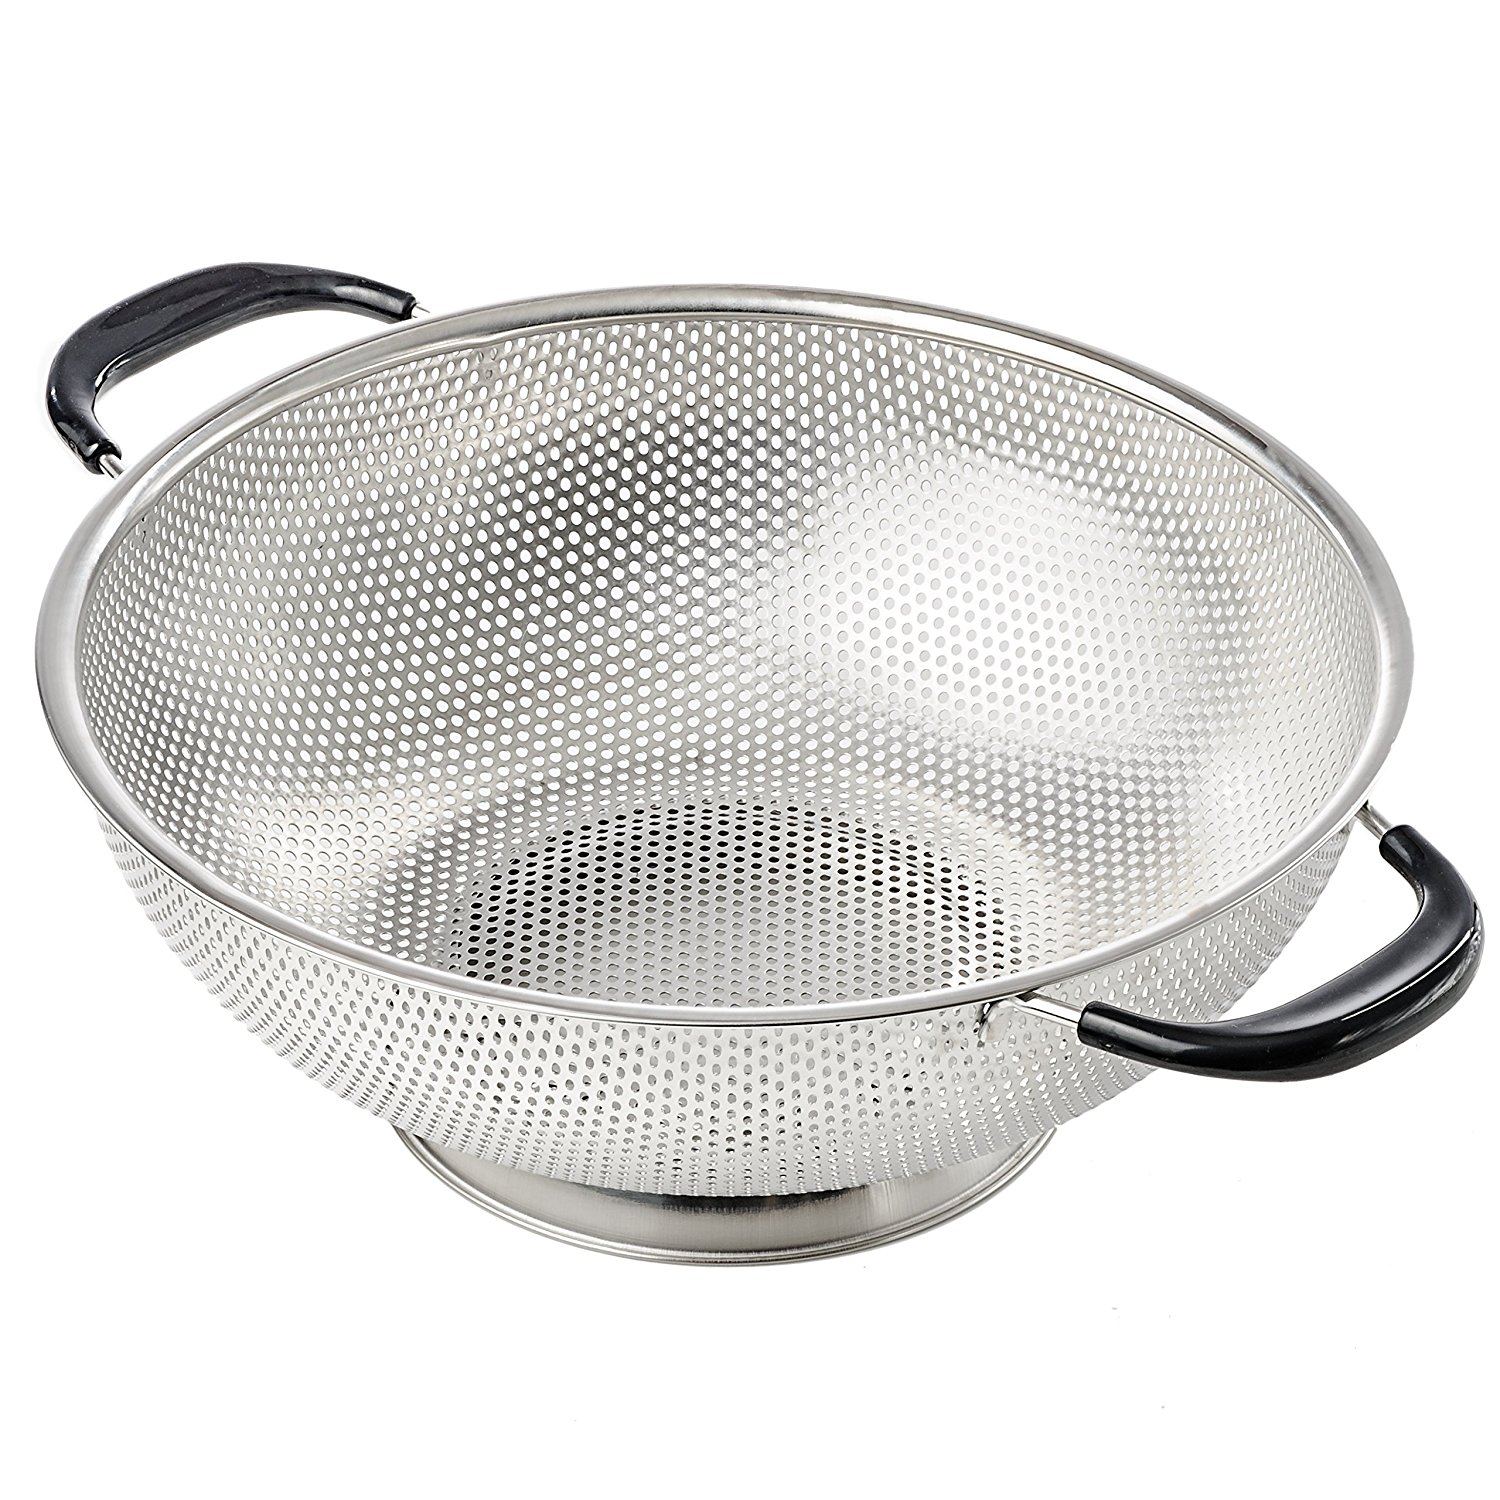 The Top 12 Colander for your Kitchen - Smart Products Review